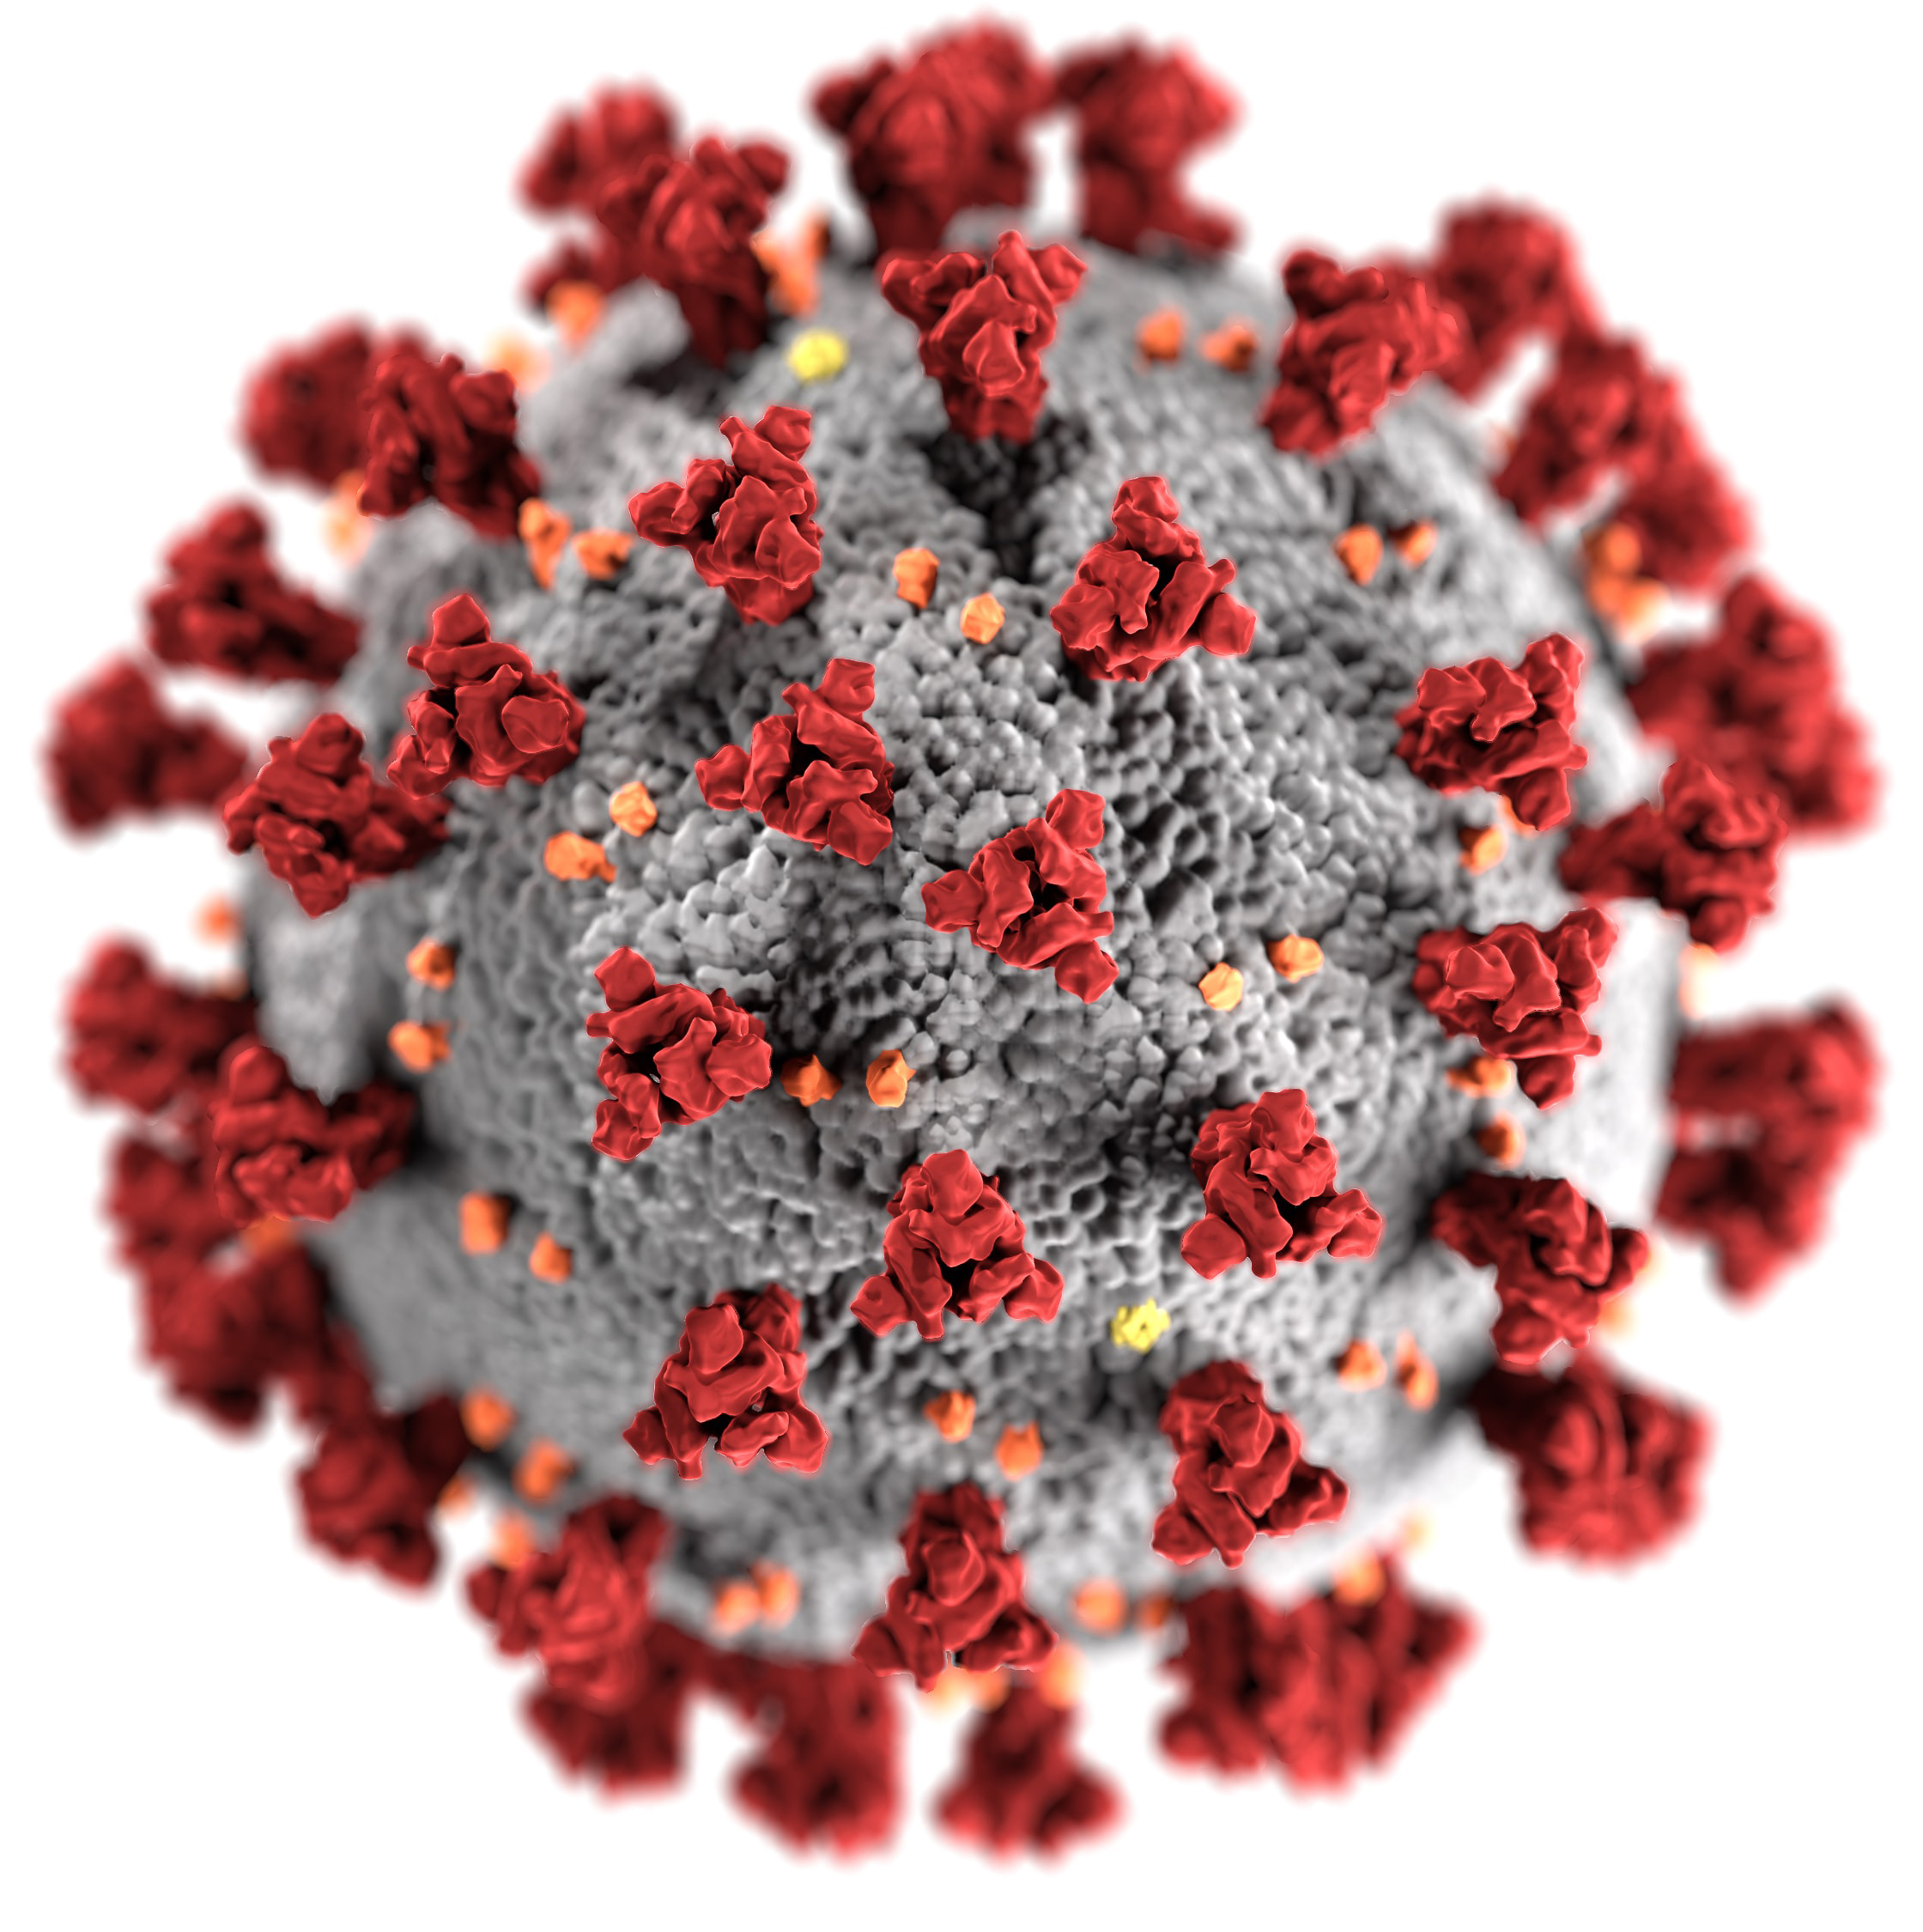 An depiction of the COVID virus